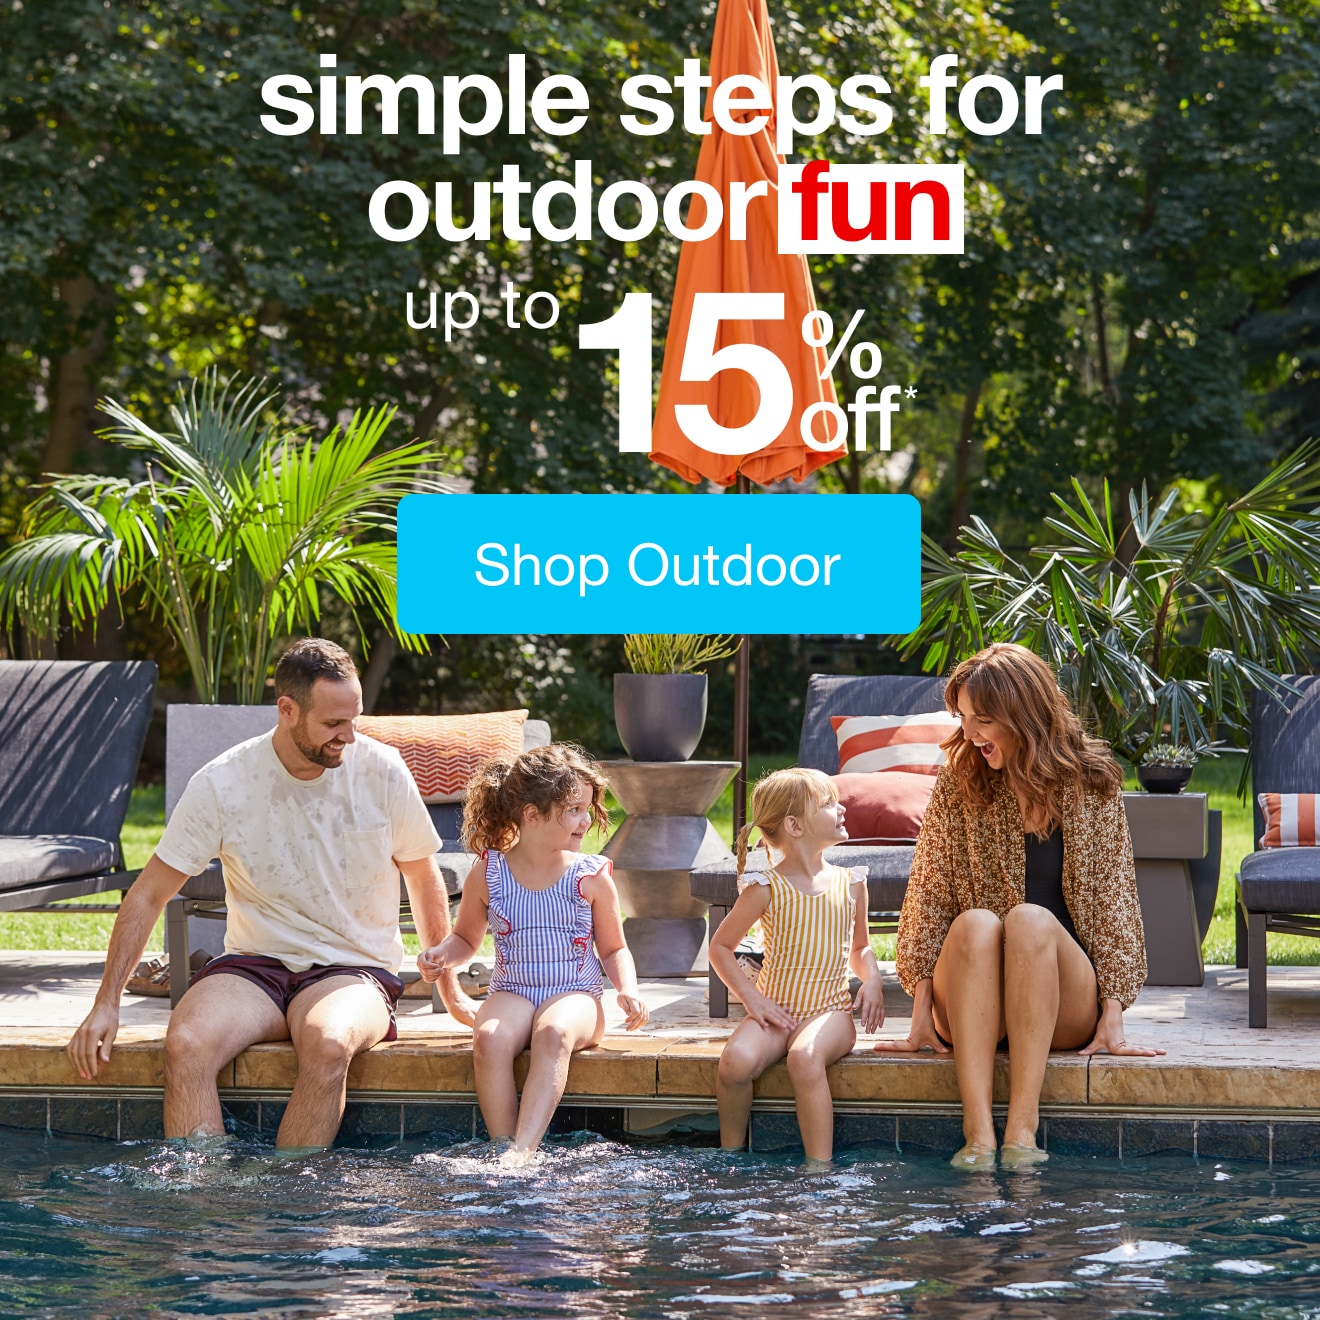 Celebrate Outside - Up to 15% Off - Shop Outdoor!